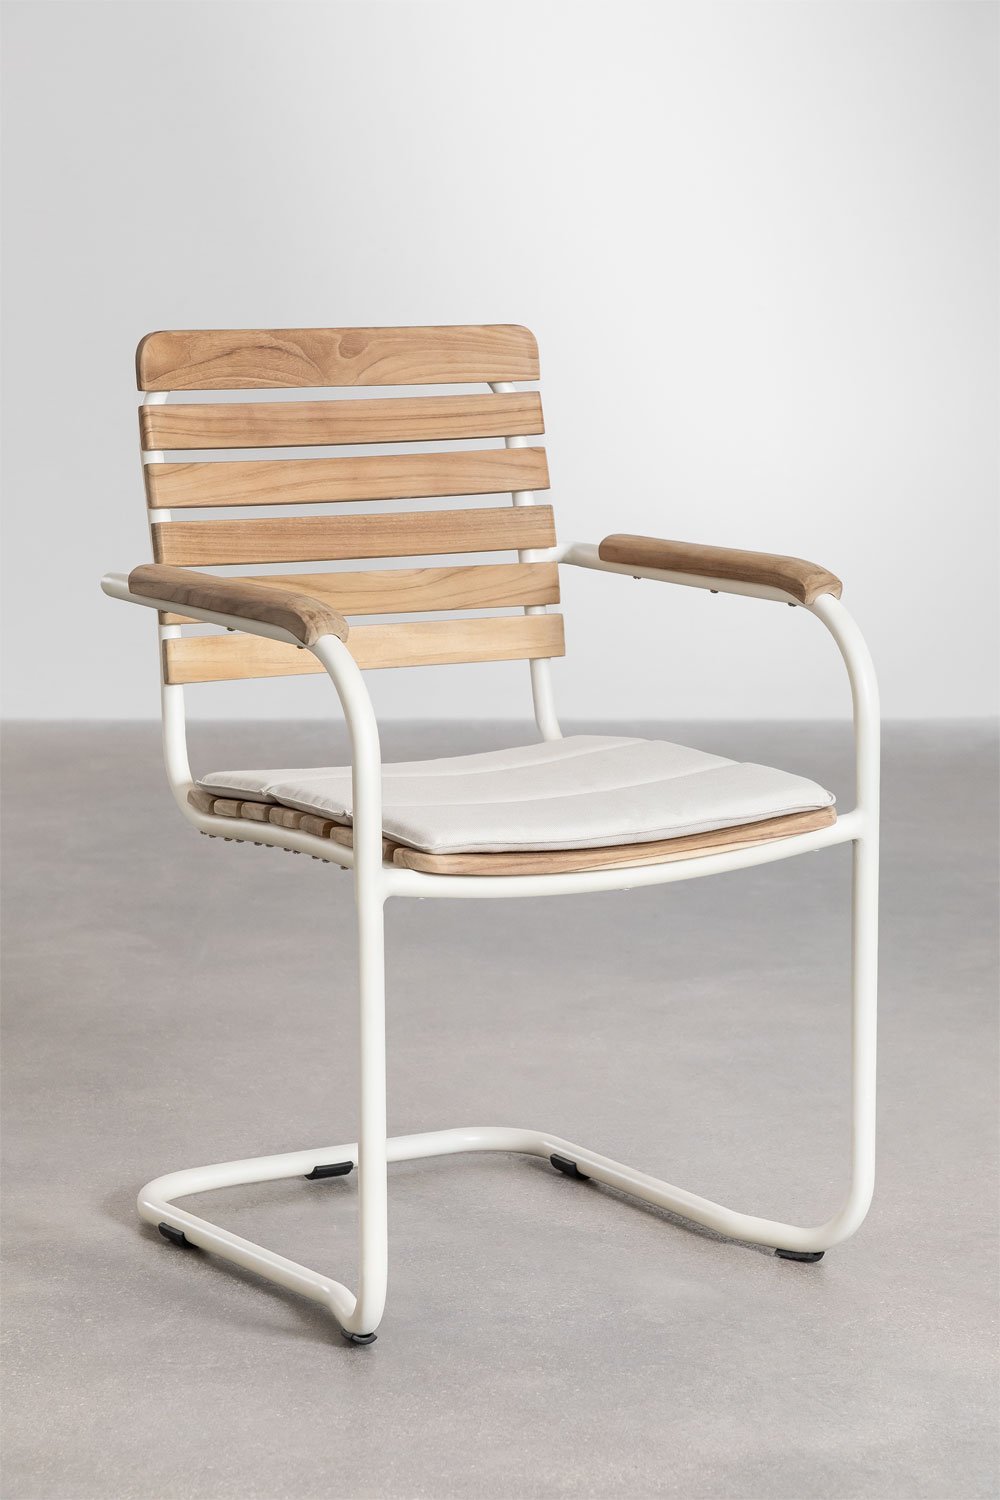 Garden Chair with Armrests in Teak Wood and Aluminum Lowel, gallery image 1